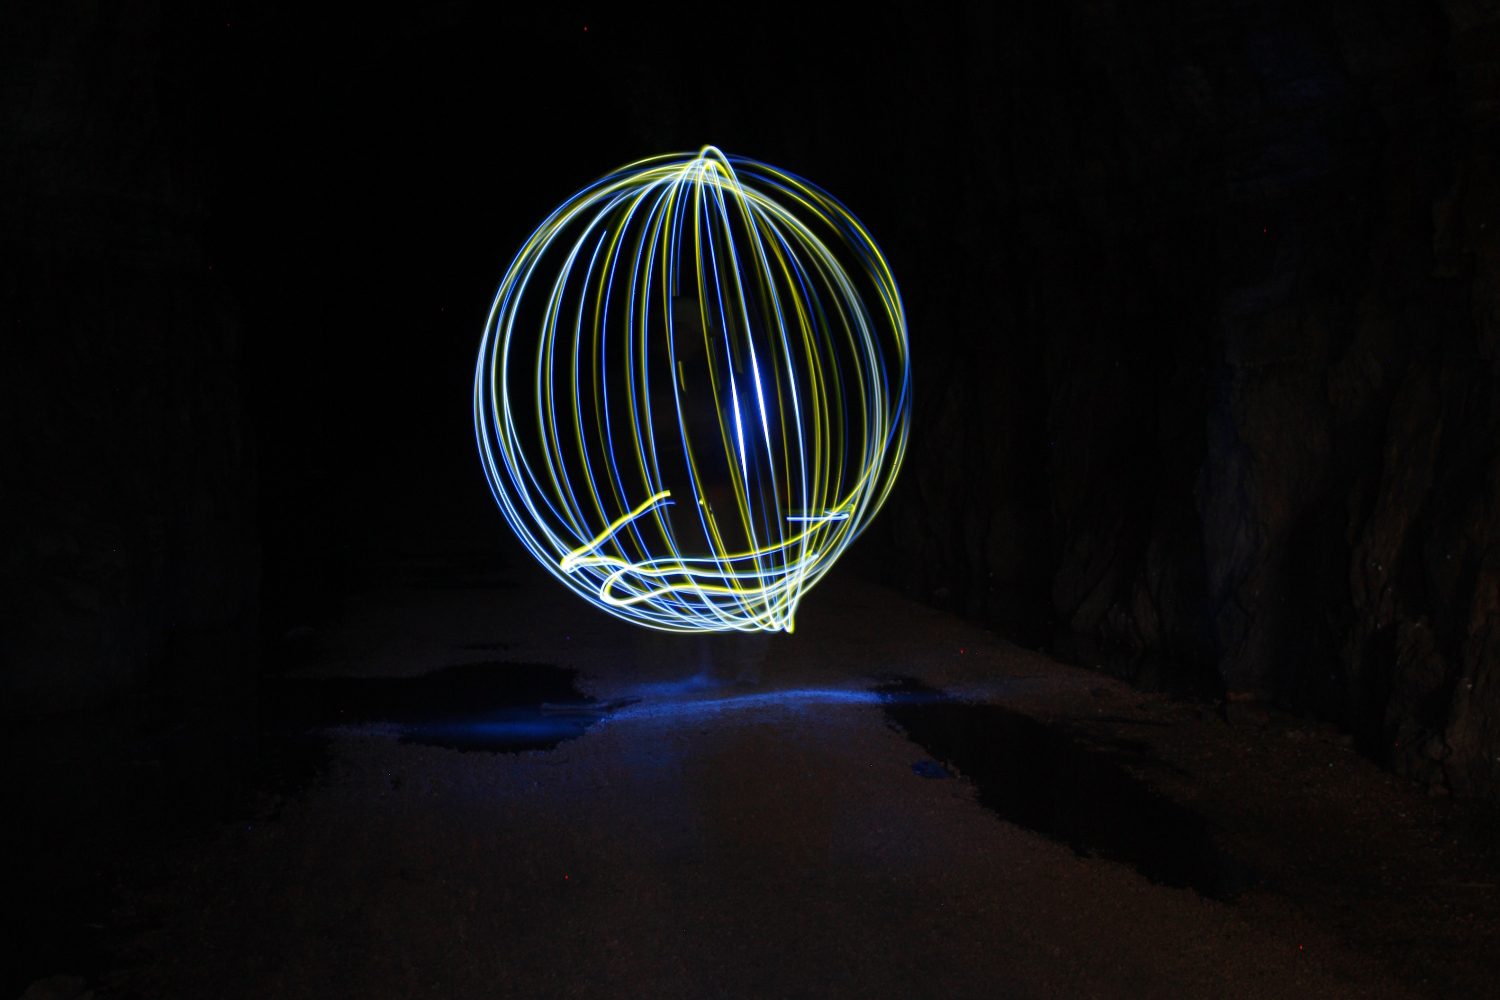 http://www.boostyourphotography.com/2013/06/light-painting-how-to-spin-orb.html